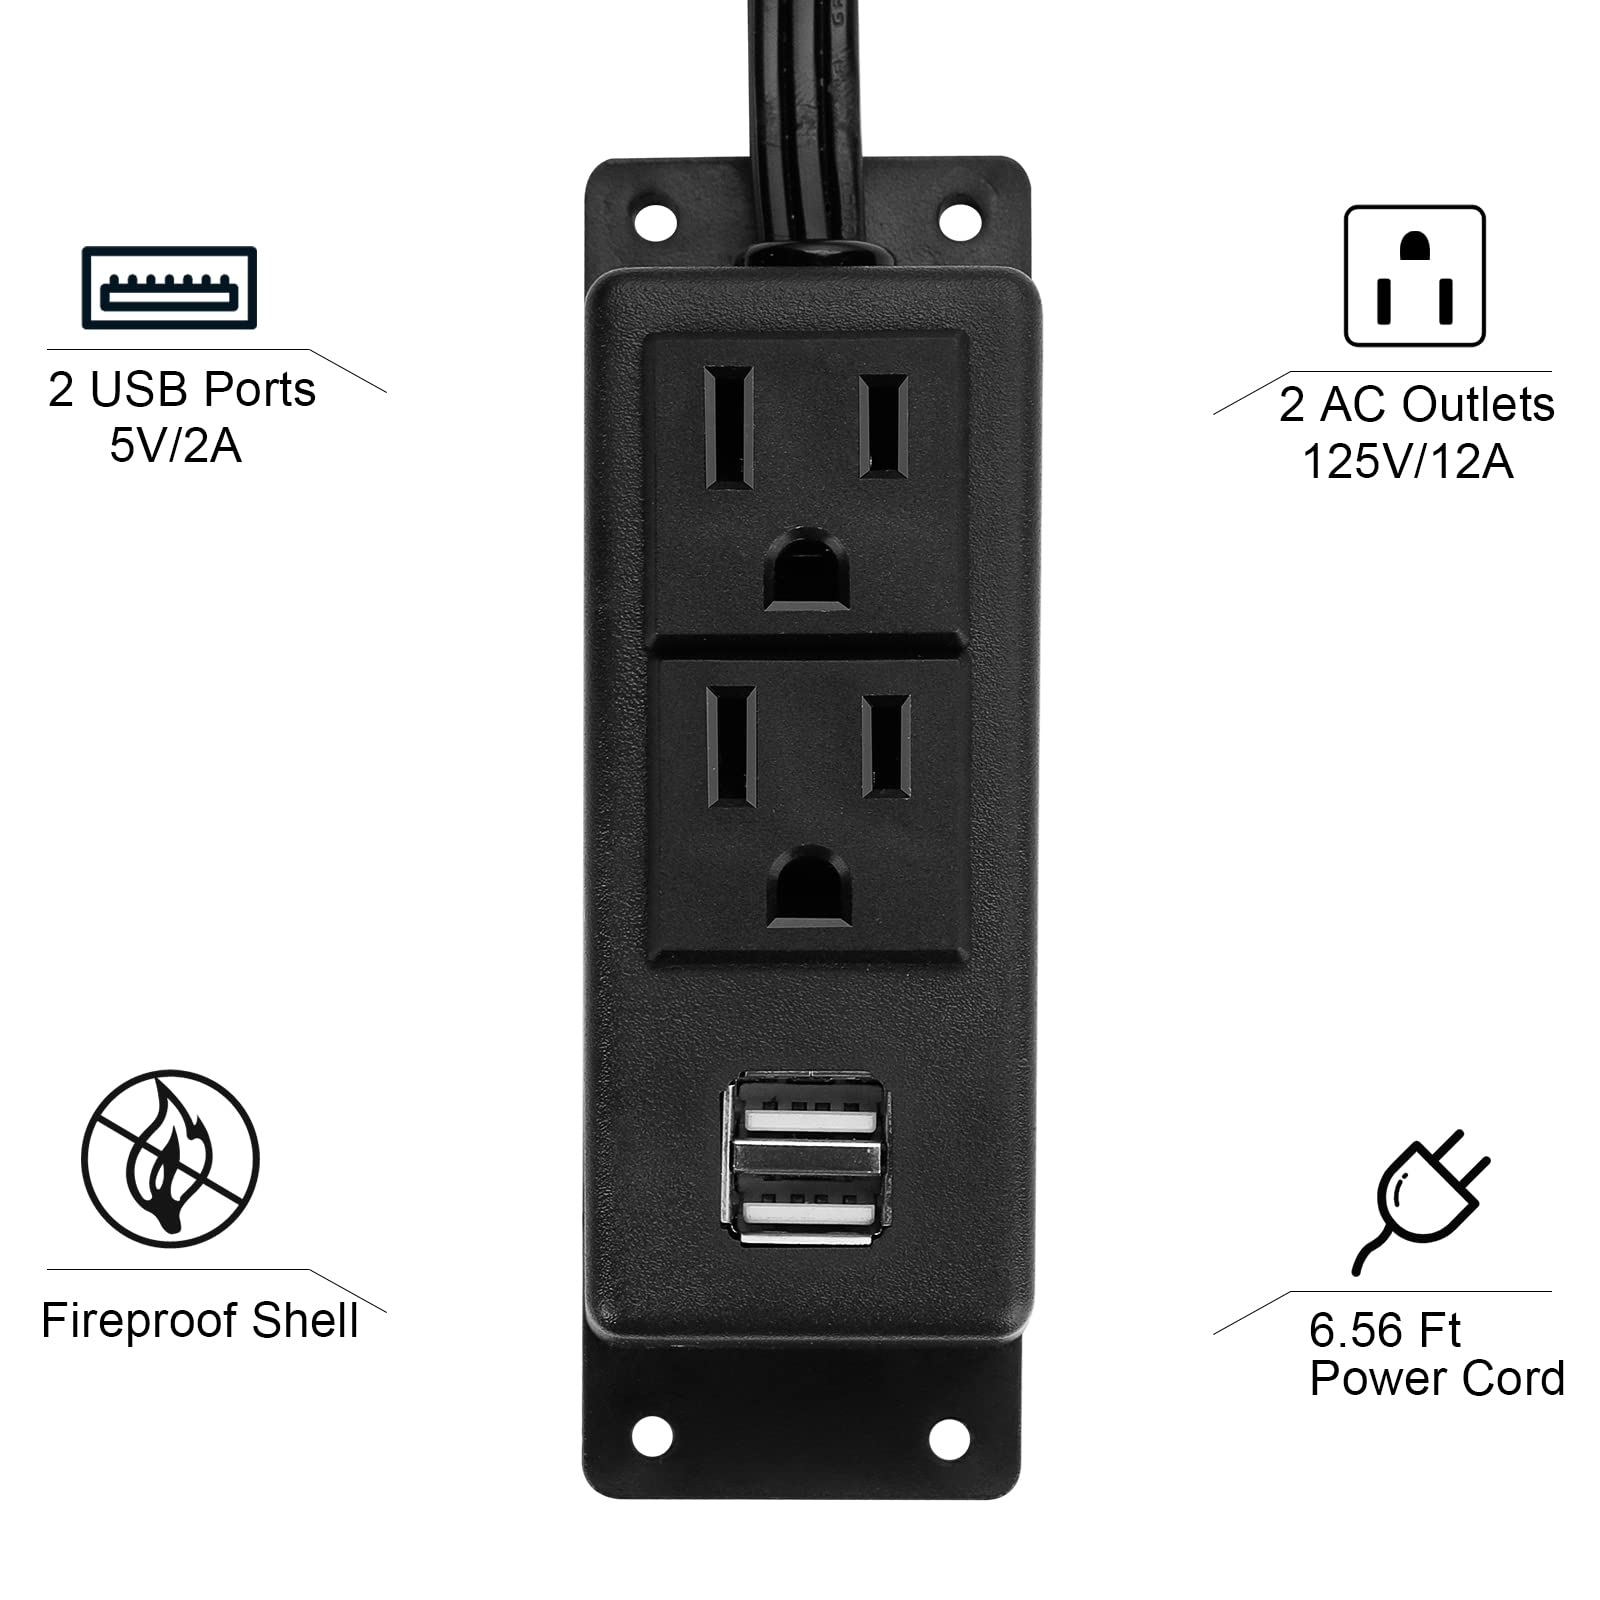 Power Strip with USB, BTU Desktop Power Outlet with 2 AC Outlets, 2 USB Ports, 6.56ft Extension Cord, Mountable Under Desk, Workbench, Nightstand, Dresser, Table, Black